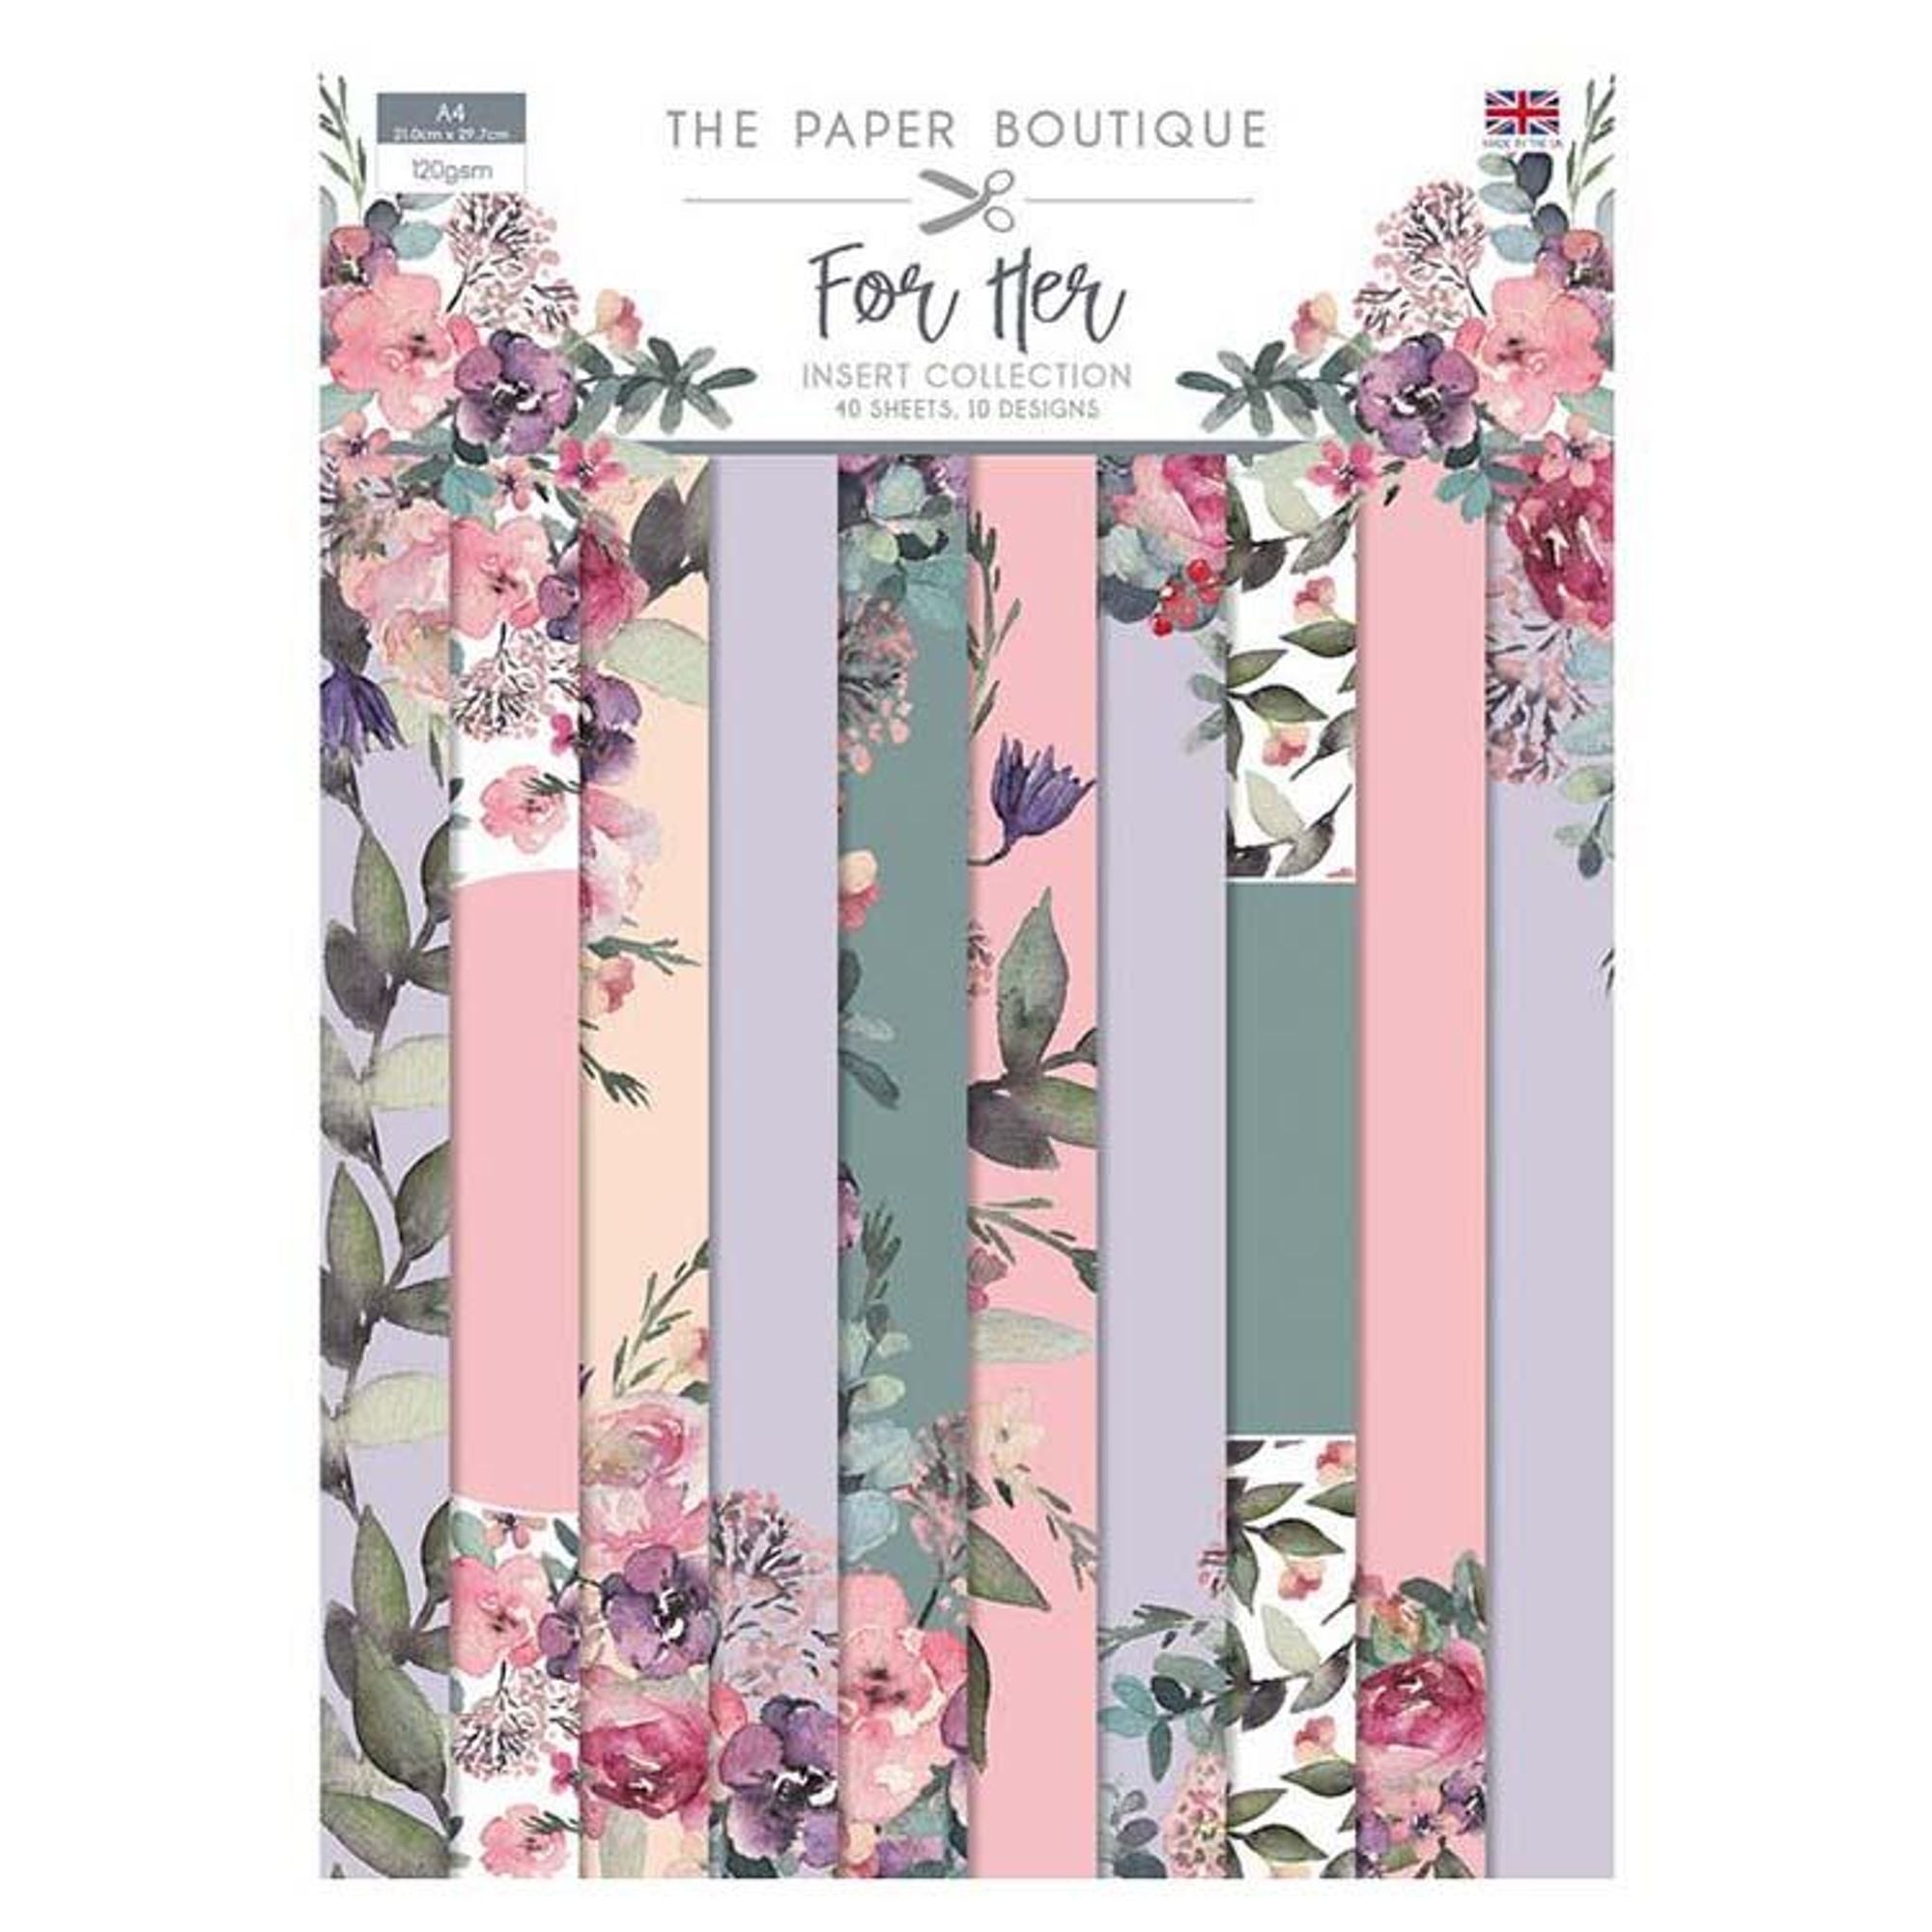 The Paper Boutique For Her Insert Collection A4 40 Sheets 10 Designs 120gsm